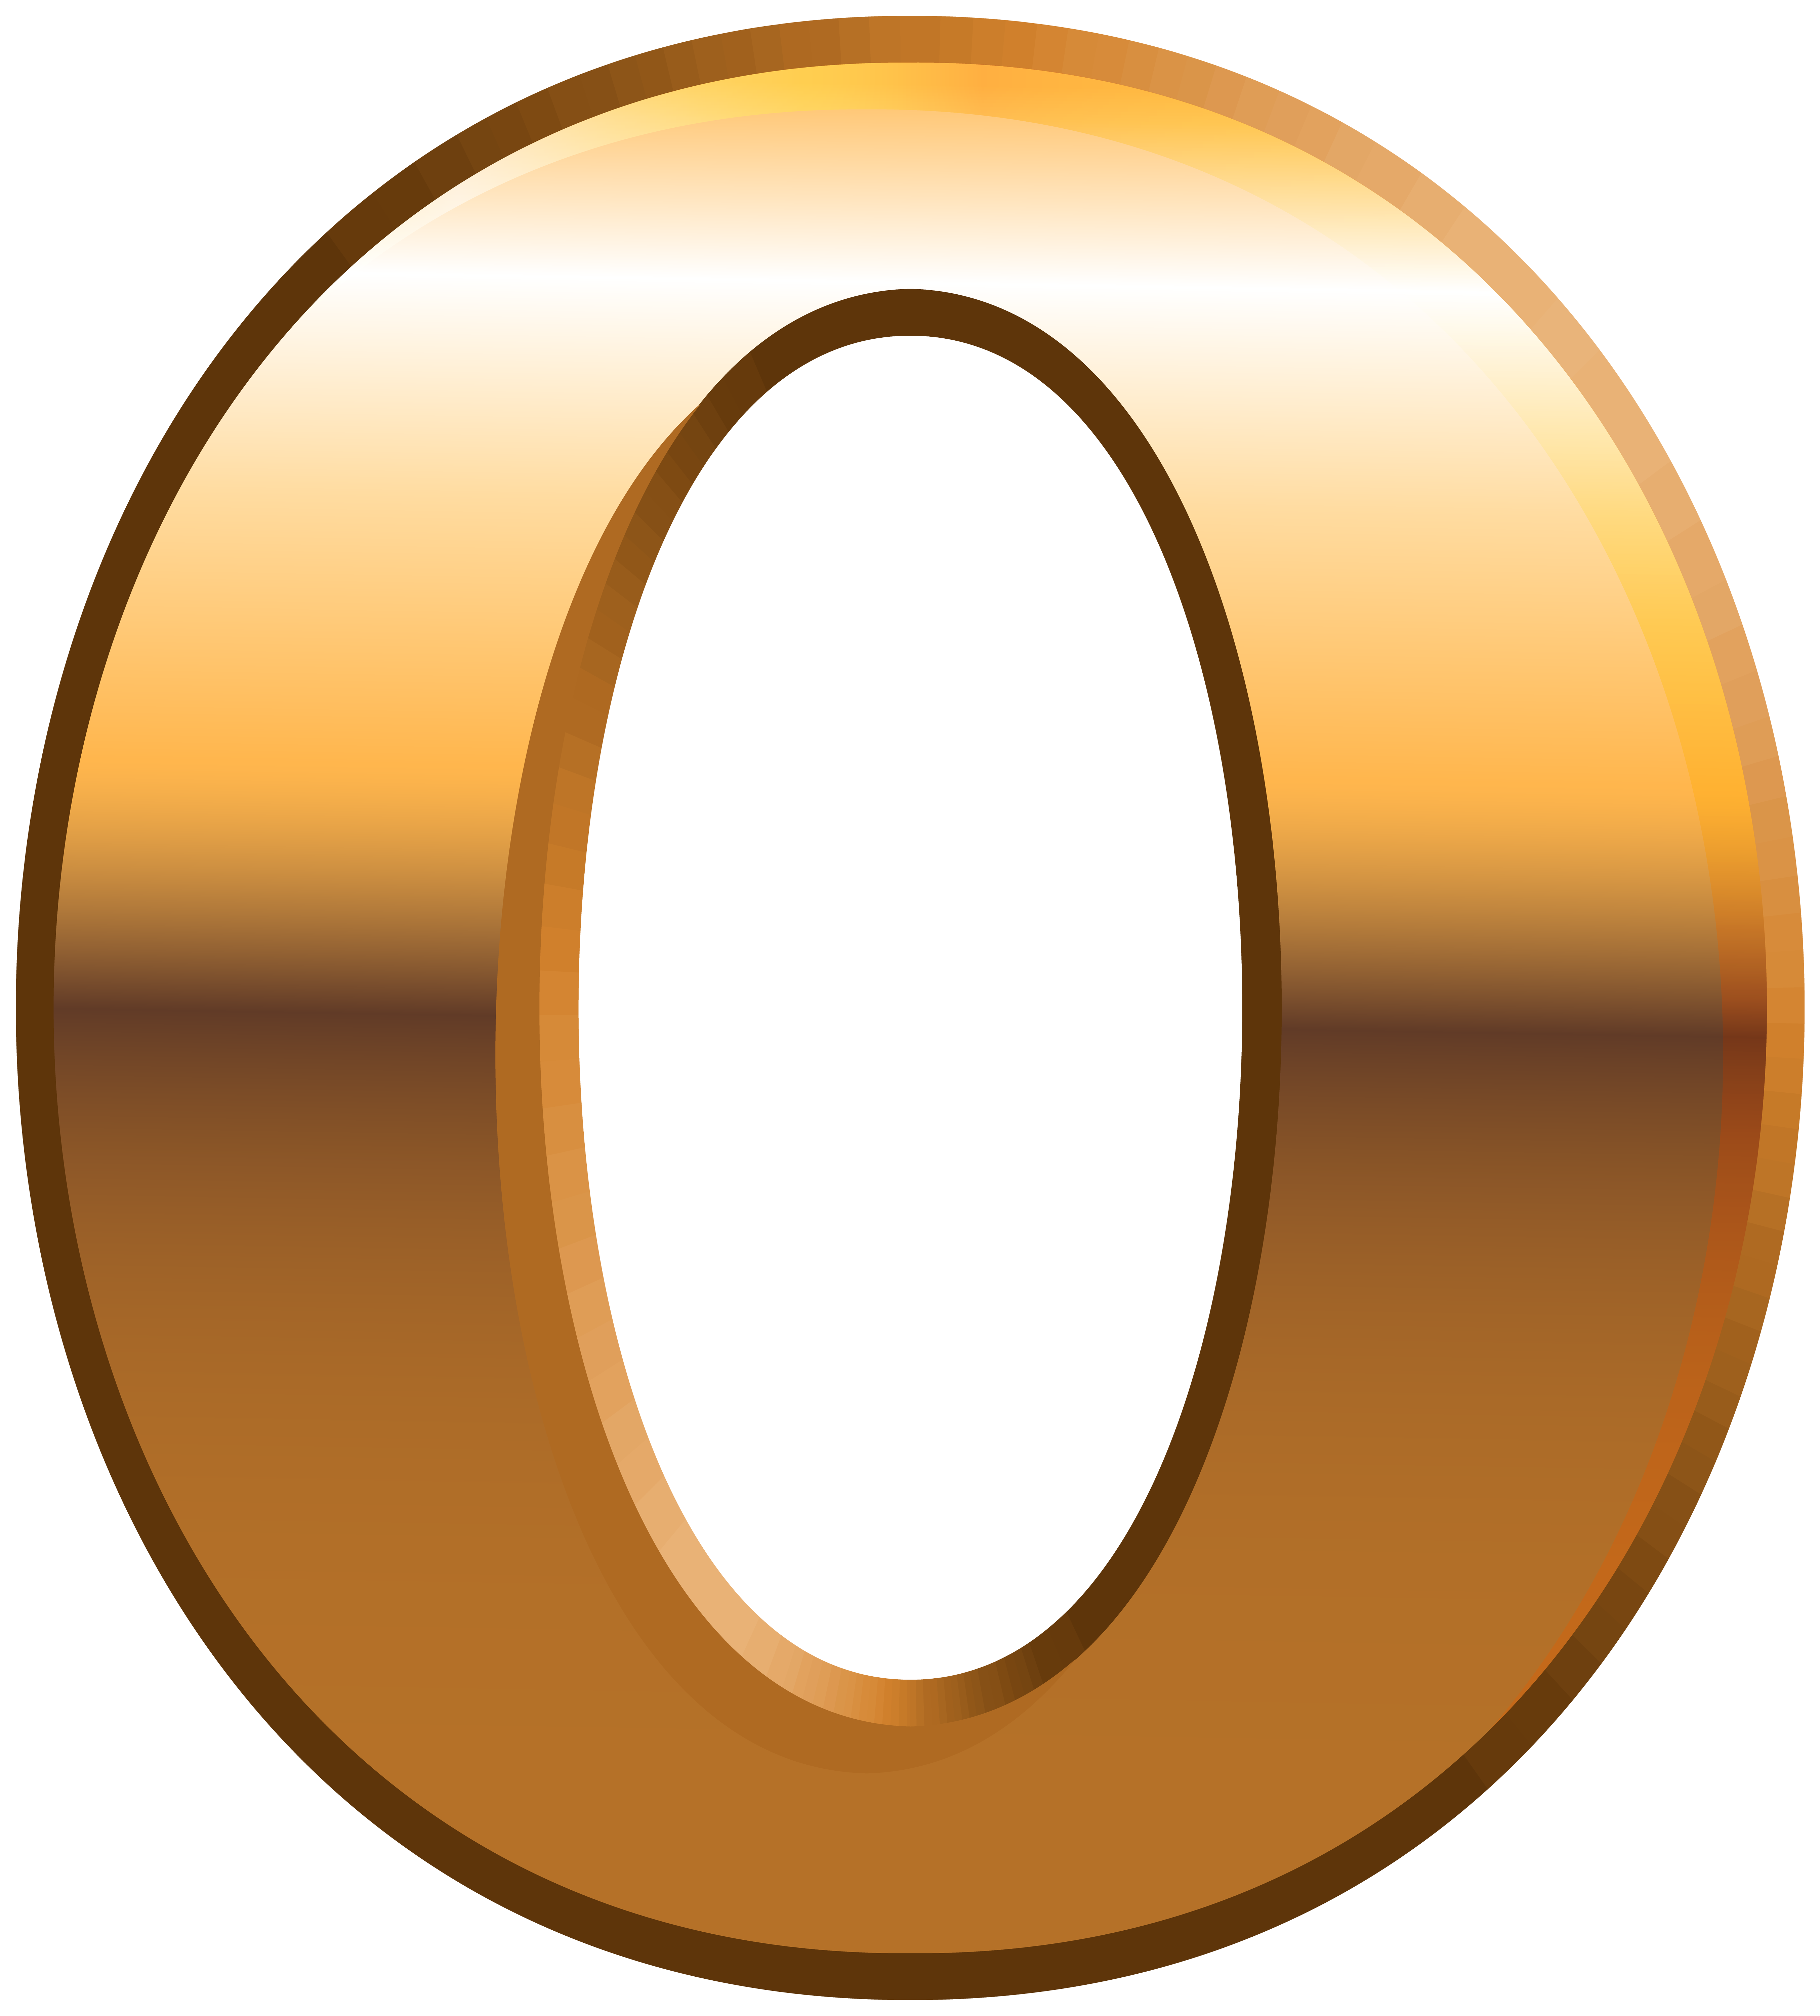 Zero Gold Number PNG Clipart